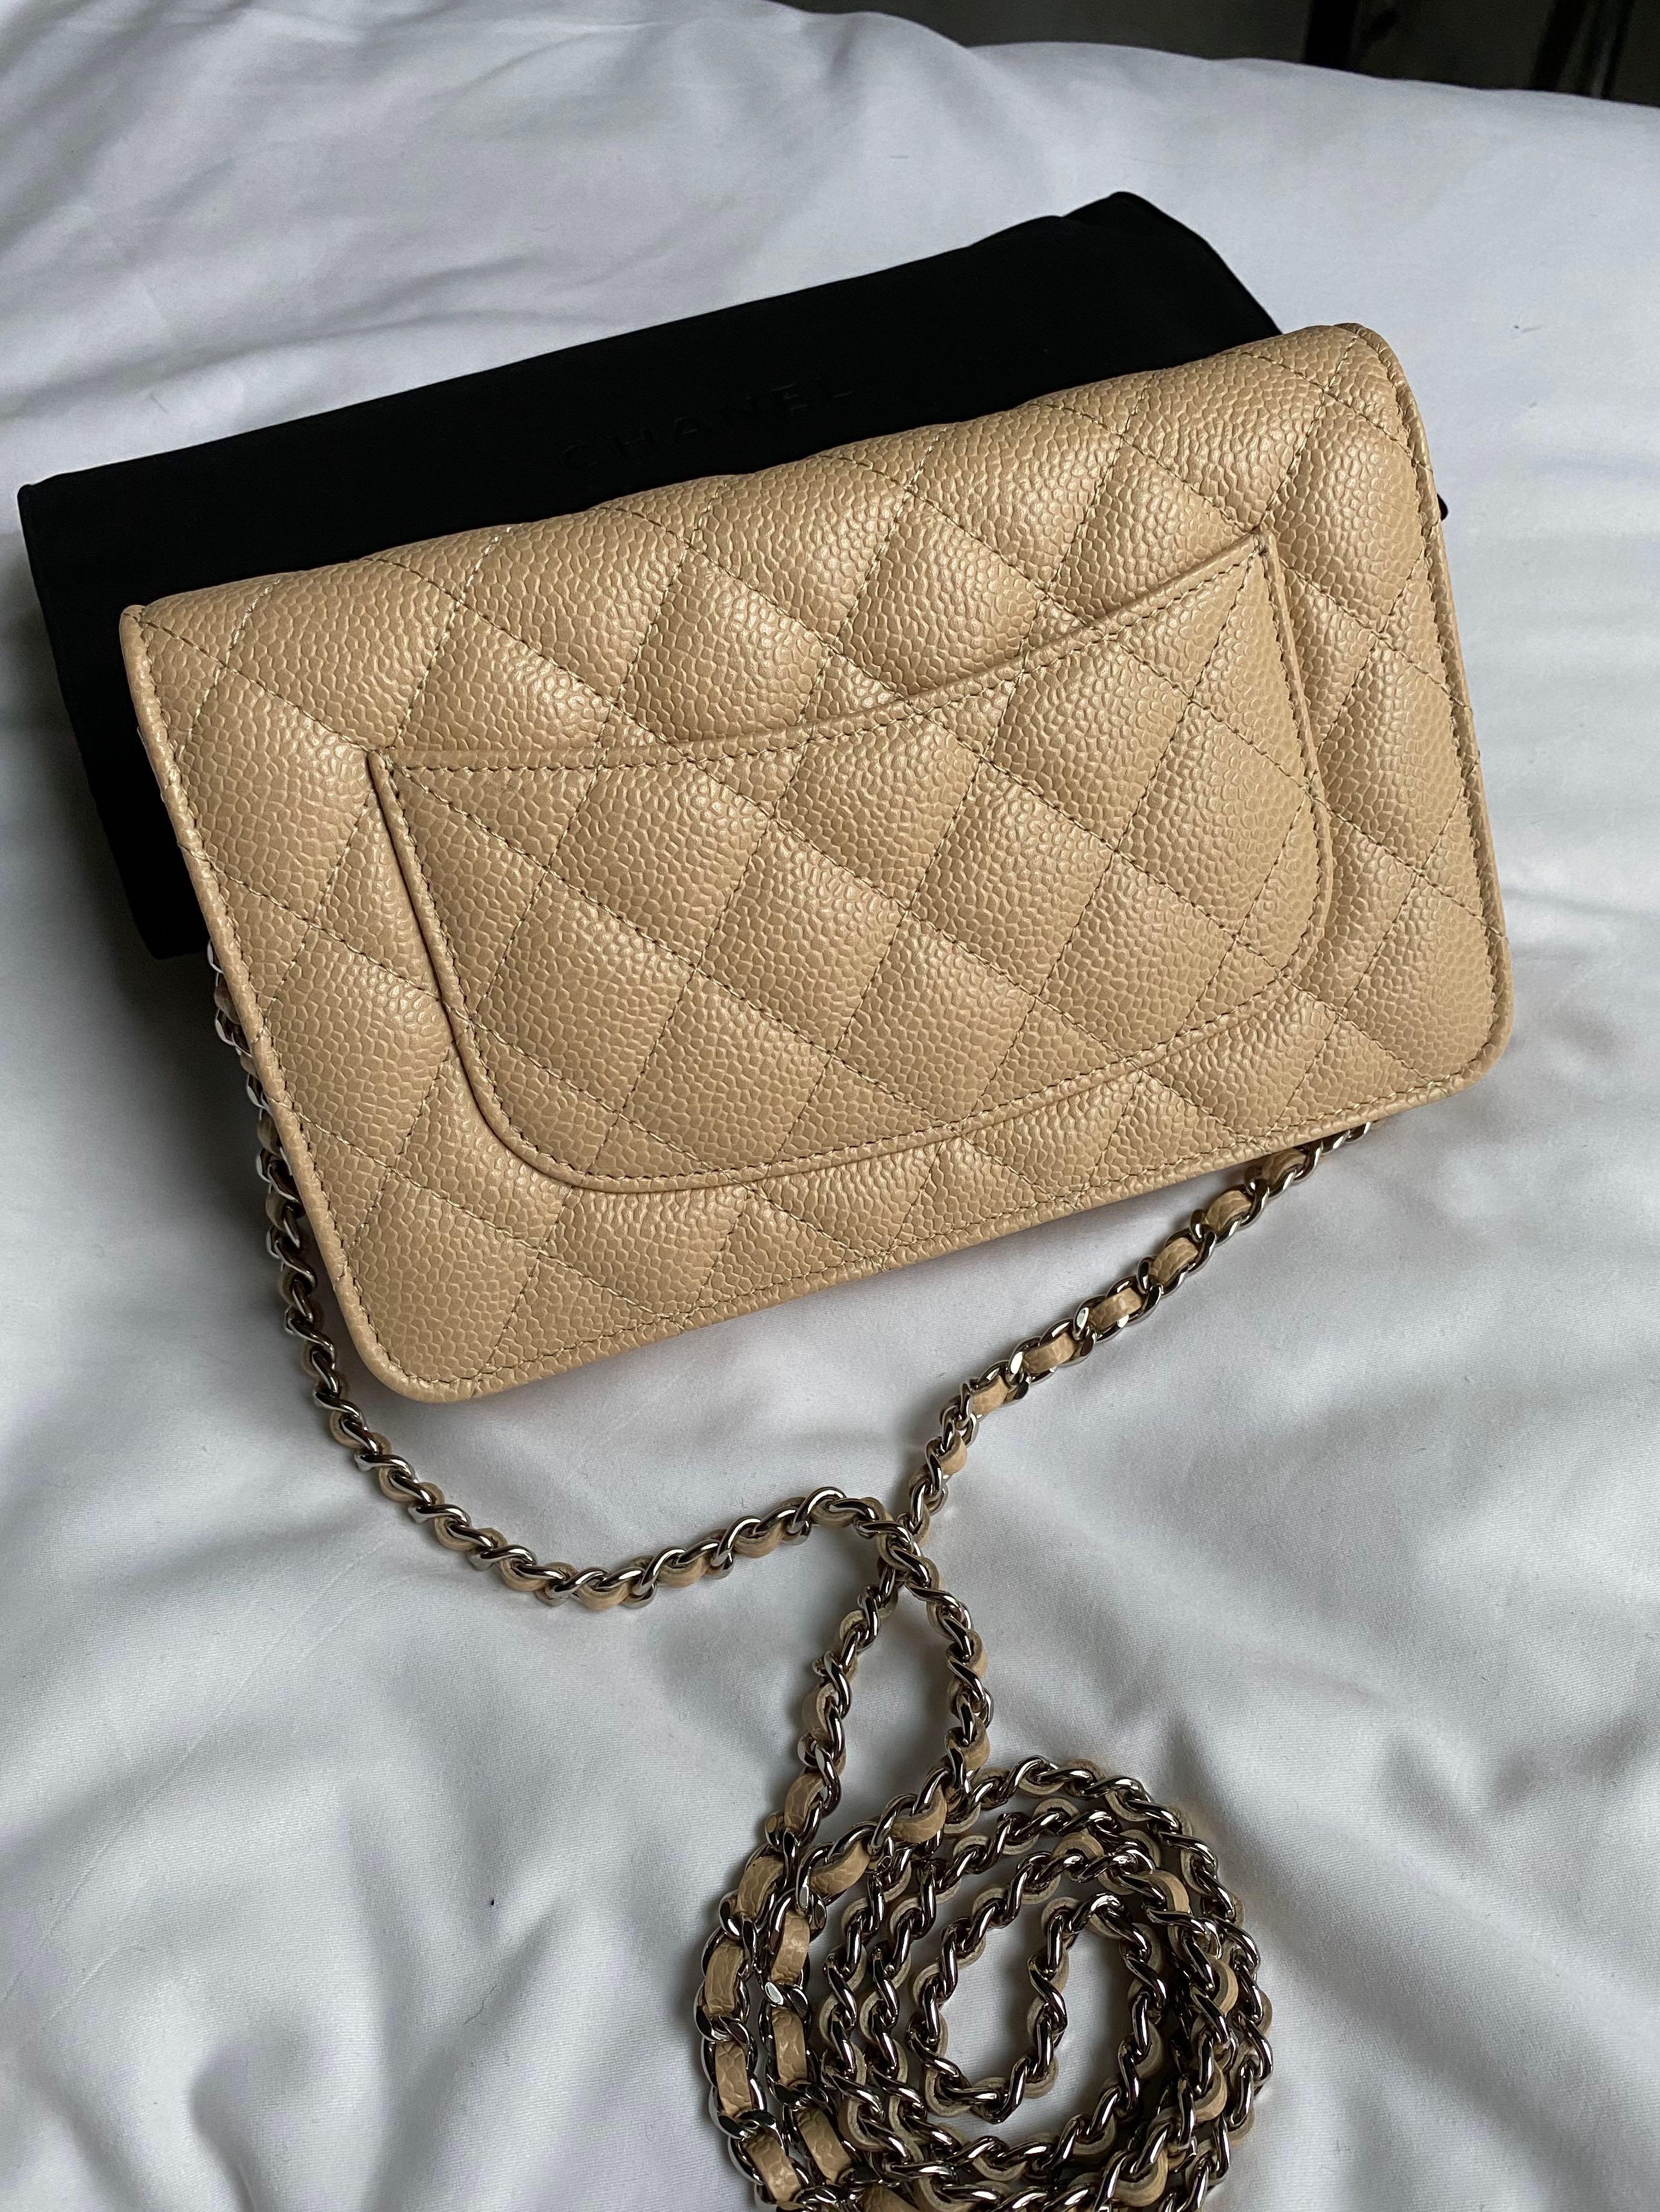 New Chanel 22A Beige Nude Caviar Leather WOC Wallet on chain